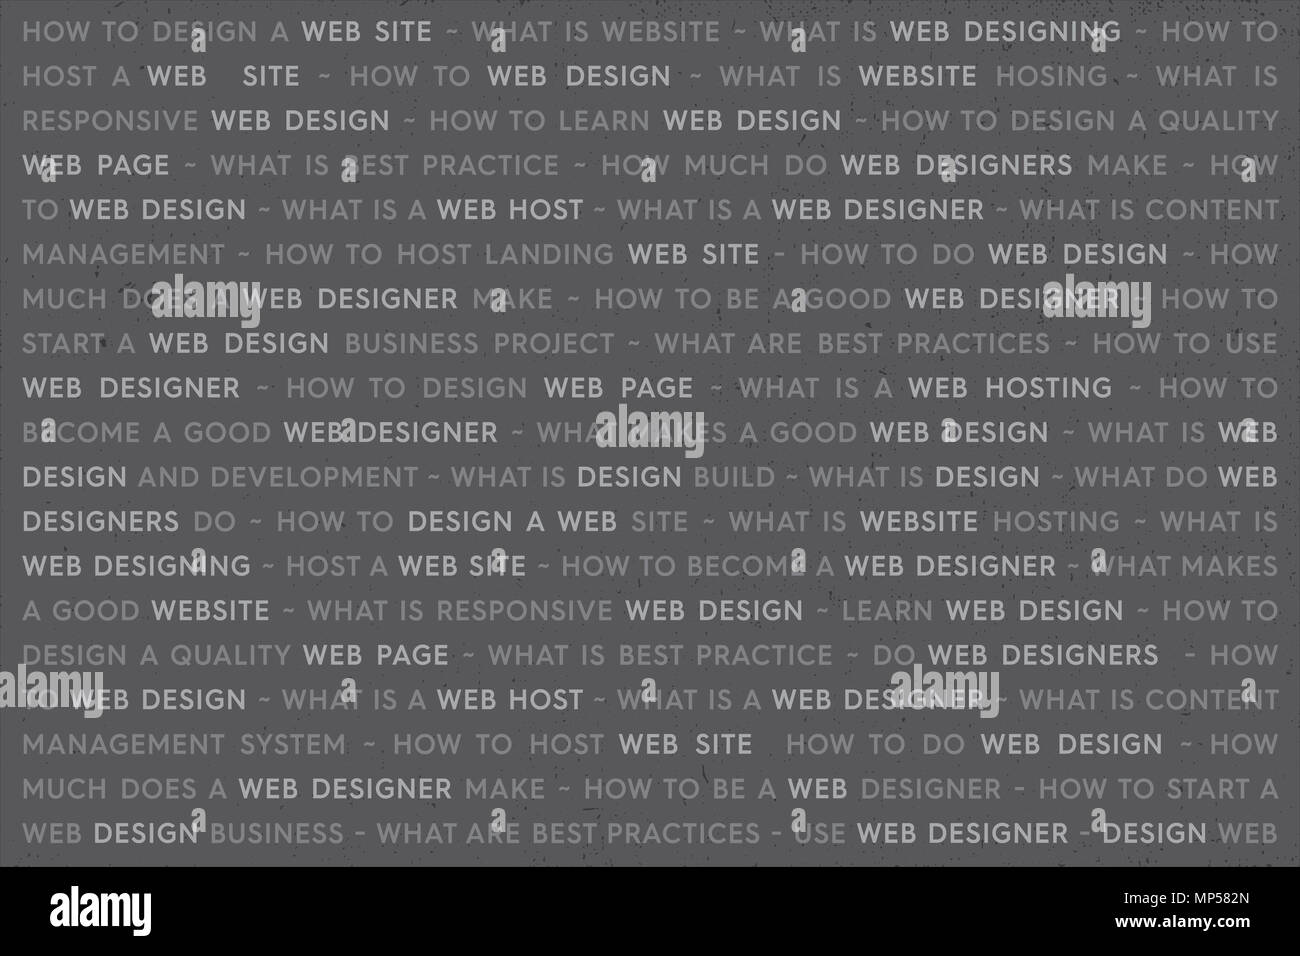 Gray Web Design Keywords Background. Web Network Working Text with Gray Highlighted Key Words. Internet Technology Conceptual Creative. Stock Photo